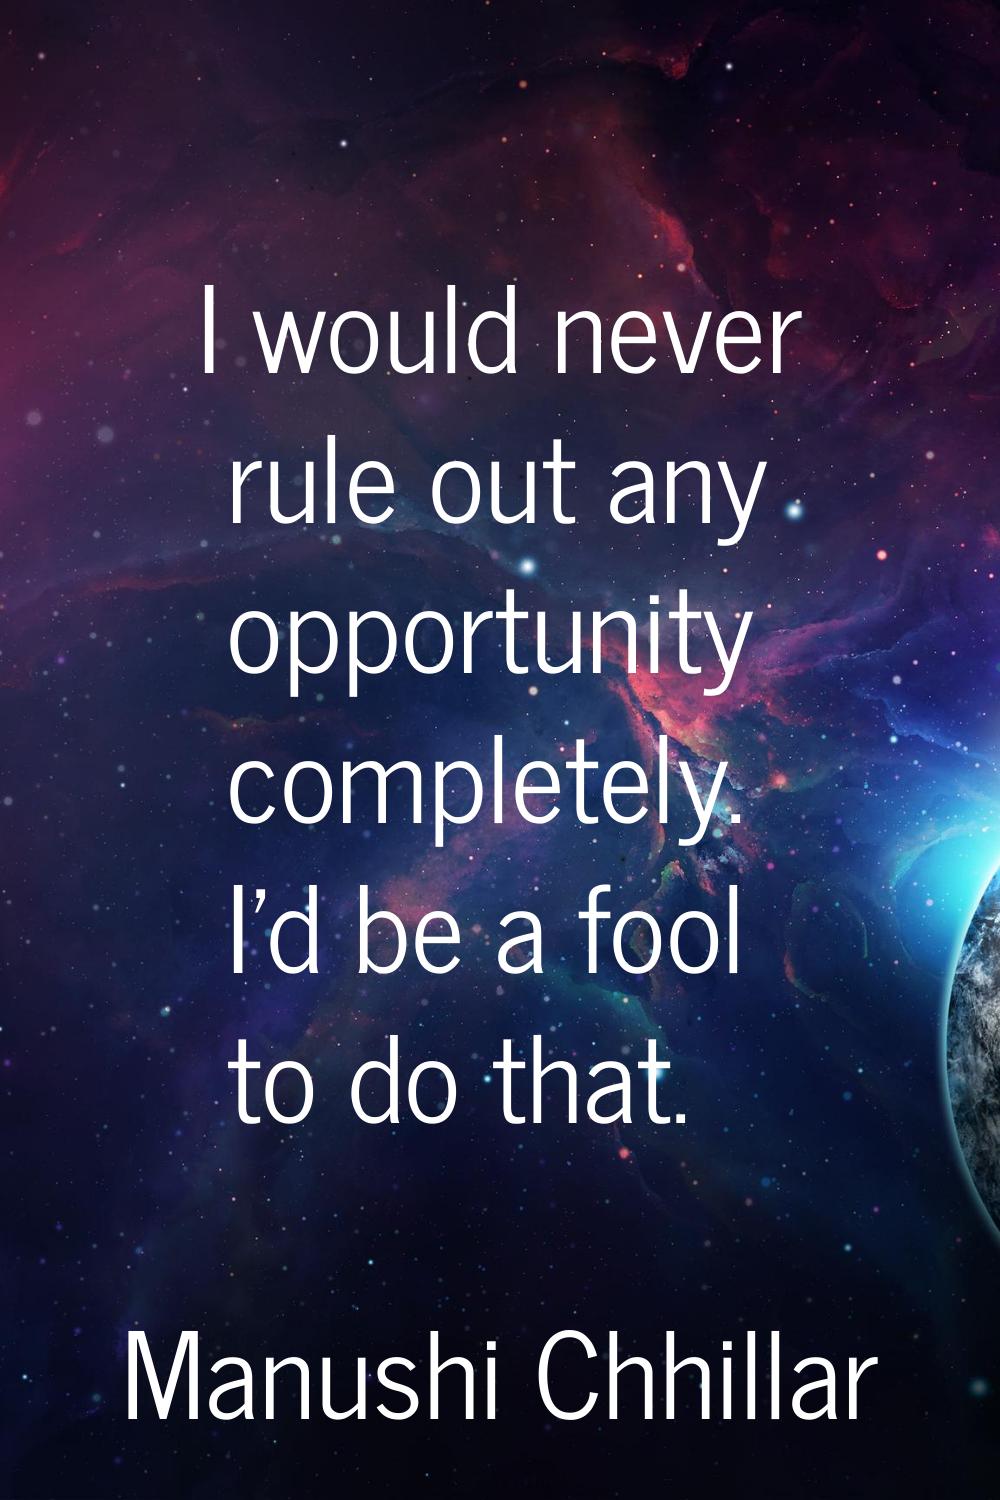 I would never rule out any opportunity completely. I'd be a fool to do that.